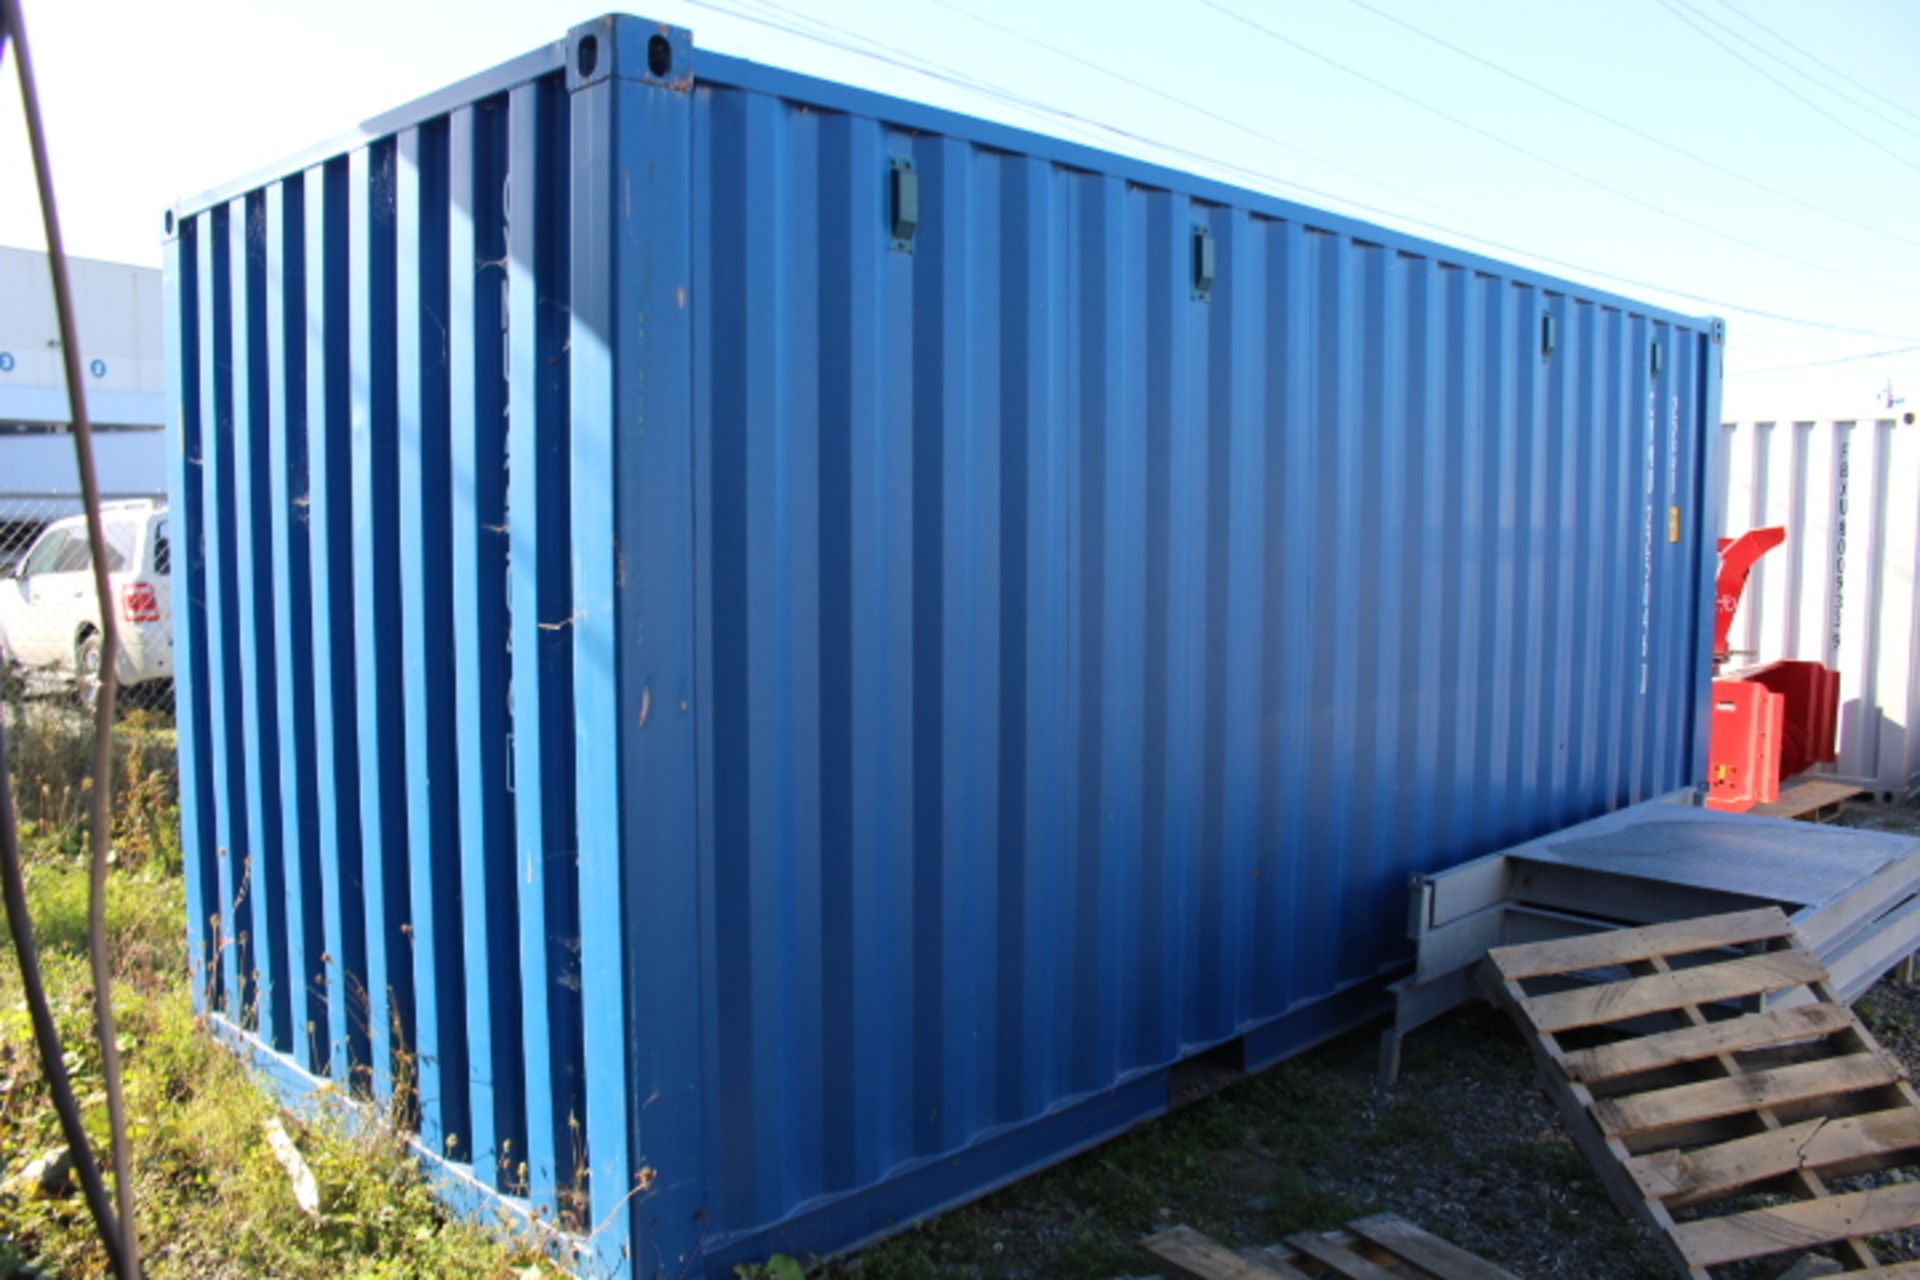 Storage/work sea can 8'6" H x 20' L insulated & wired w/200A panel - Image 4 of 6